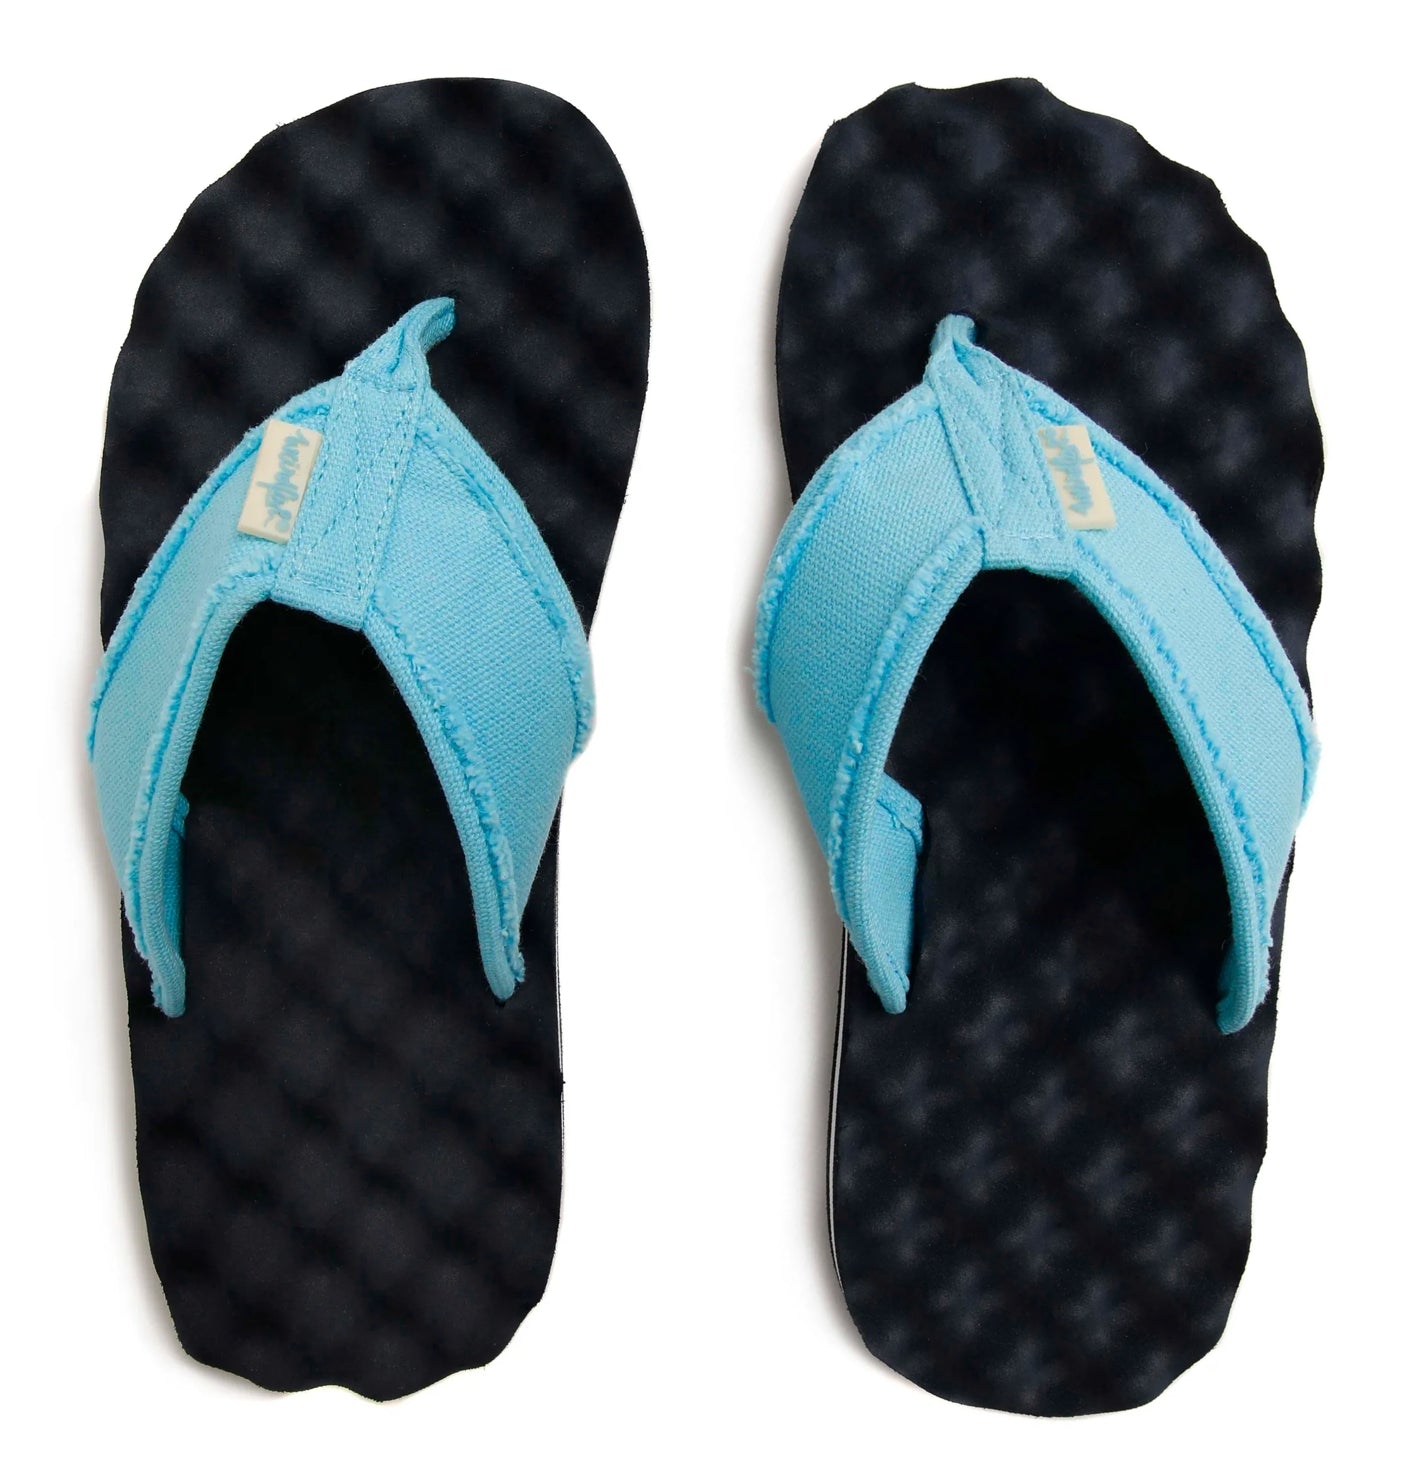 Women's Cayman flip flops from Weird Fish in Navy with a Blue fabric strap with frayed trim.